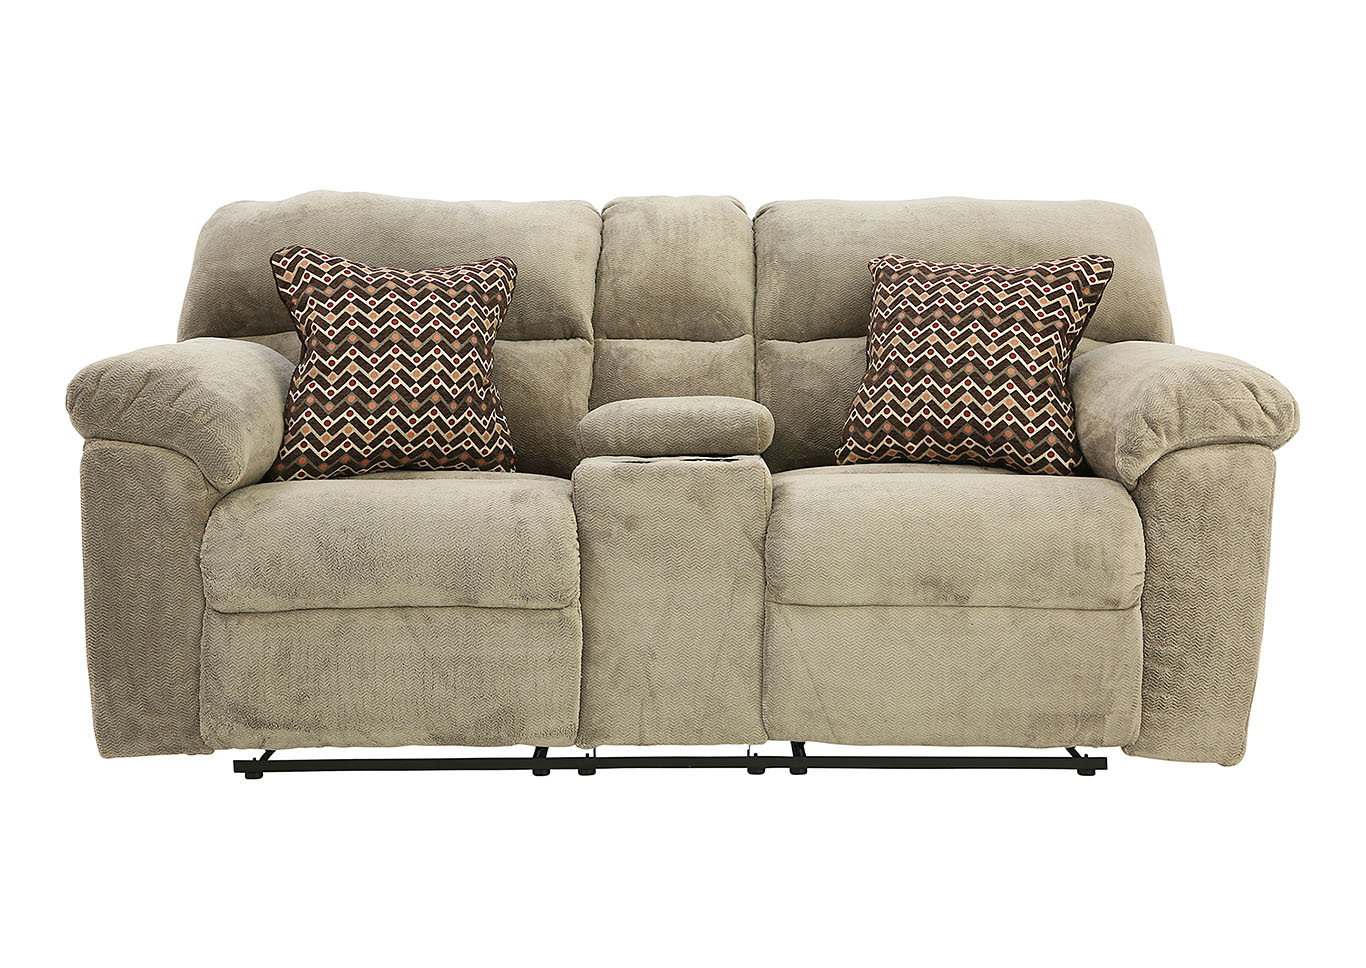 CHEVRON SEAL MOTION LOVESEAT,AFFORDABLE FURNITURE